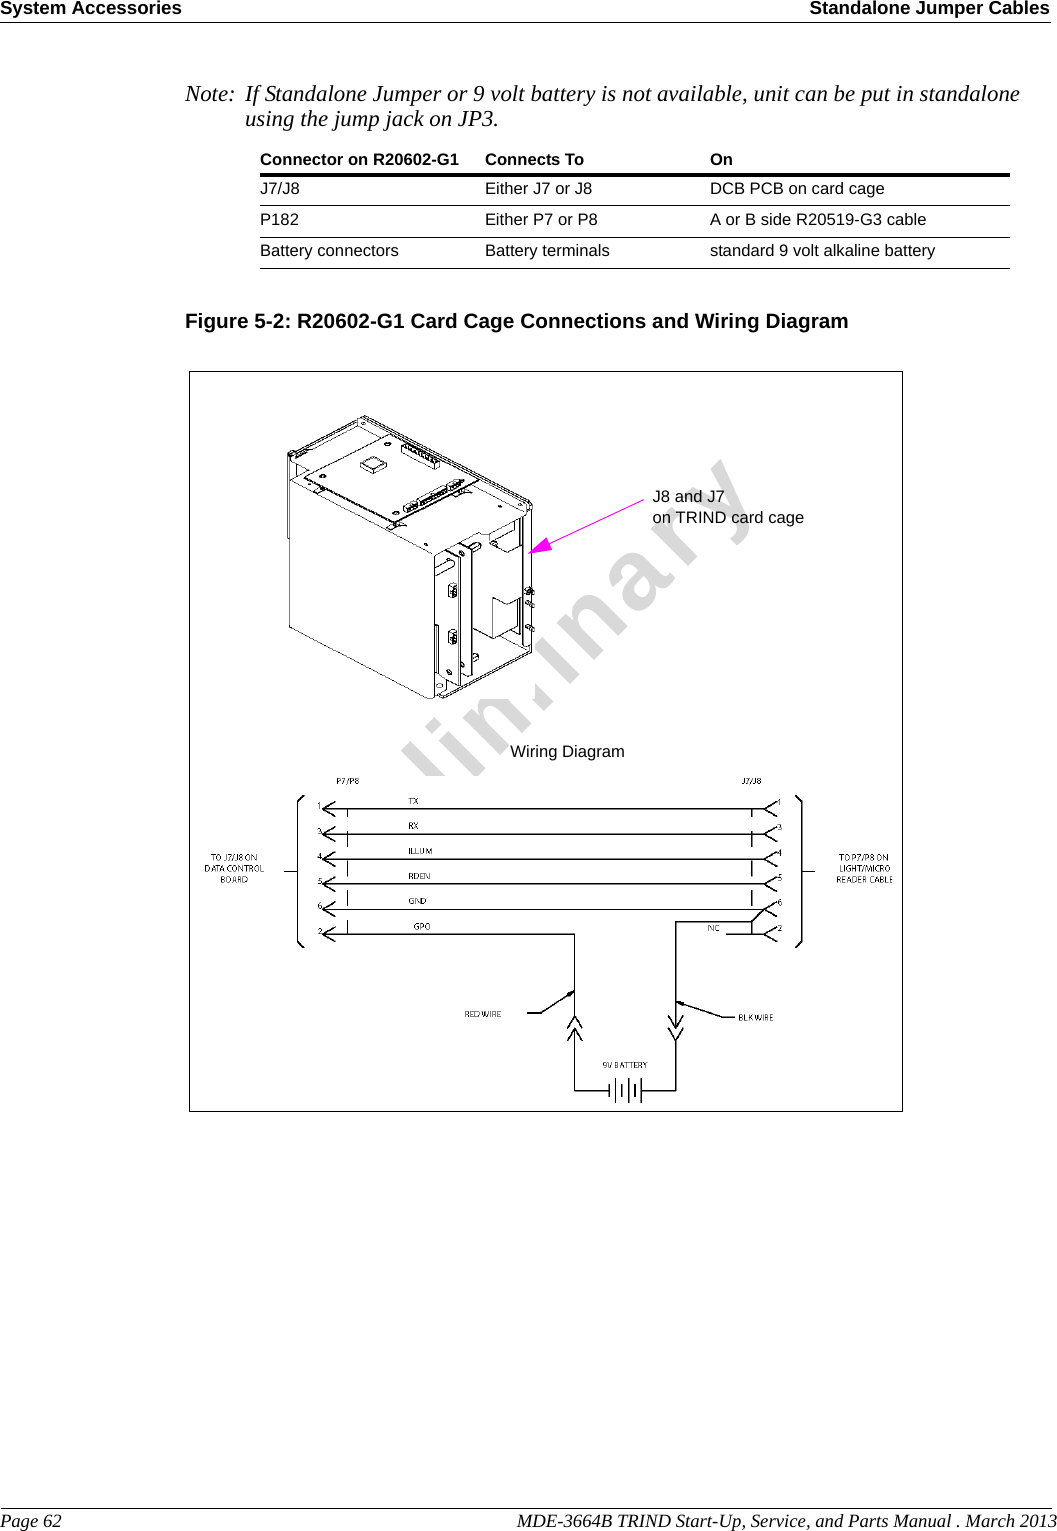 System Accessories Standalone Jumper CablesPage 62                                                                                                  MDE-3664B TRIND Start-Up, Service, and Parts Manual . March 2013PreliminaryNote: If Standalone Jumper or 9 volt battery is not available, unit can be put in standalone using the jump jack on JP3.Connector on R20602-G1 Connects To OnJ7/J8 Either J7 or J8  DCB PCB on card cageP182 Either P7 or P8  A or B side R20519-G3 cableBattery connectors Battery terminals standard 9 volt alkaline batteryFigure 5-2: R20602-G1 Card Cage Connections and Wiring Diagram J8 and J7on TRIND card cageWiring Diagram